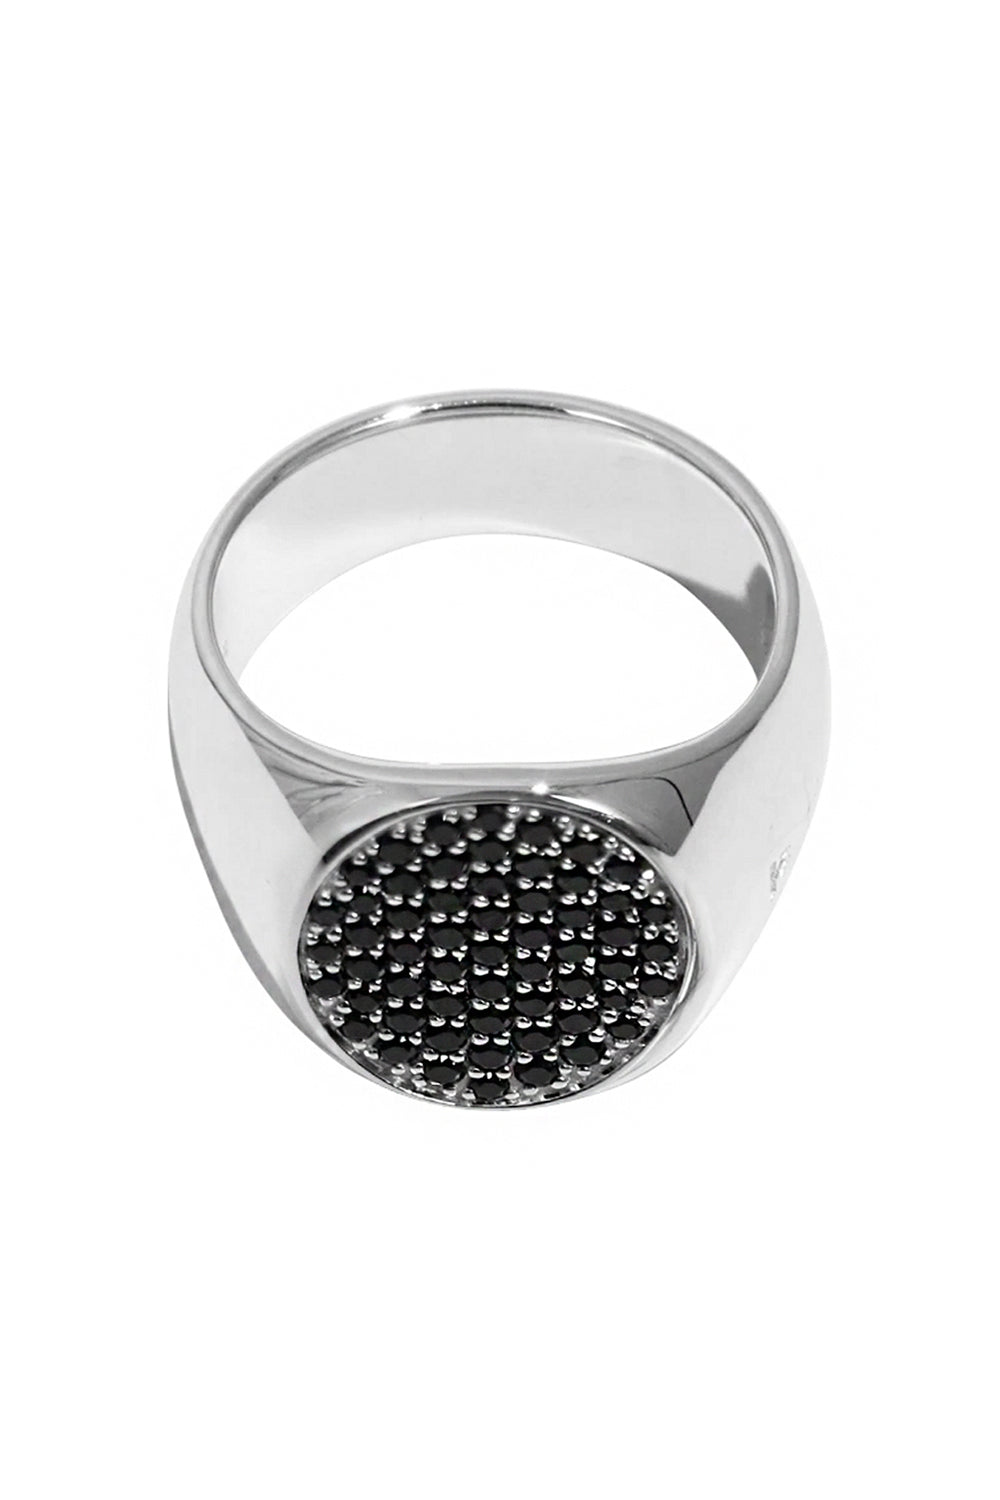 TOM WOOD JEWELLERY PINKIE OVAL RING BLACK SPINEL SILVER